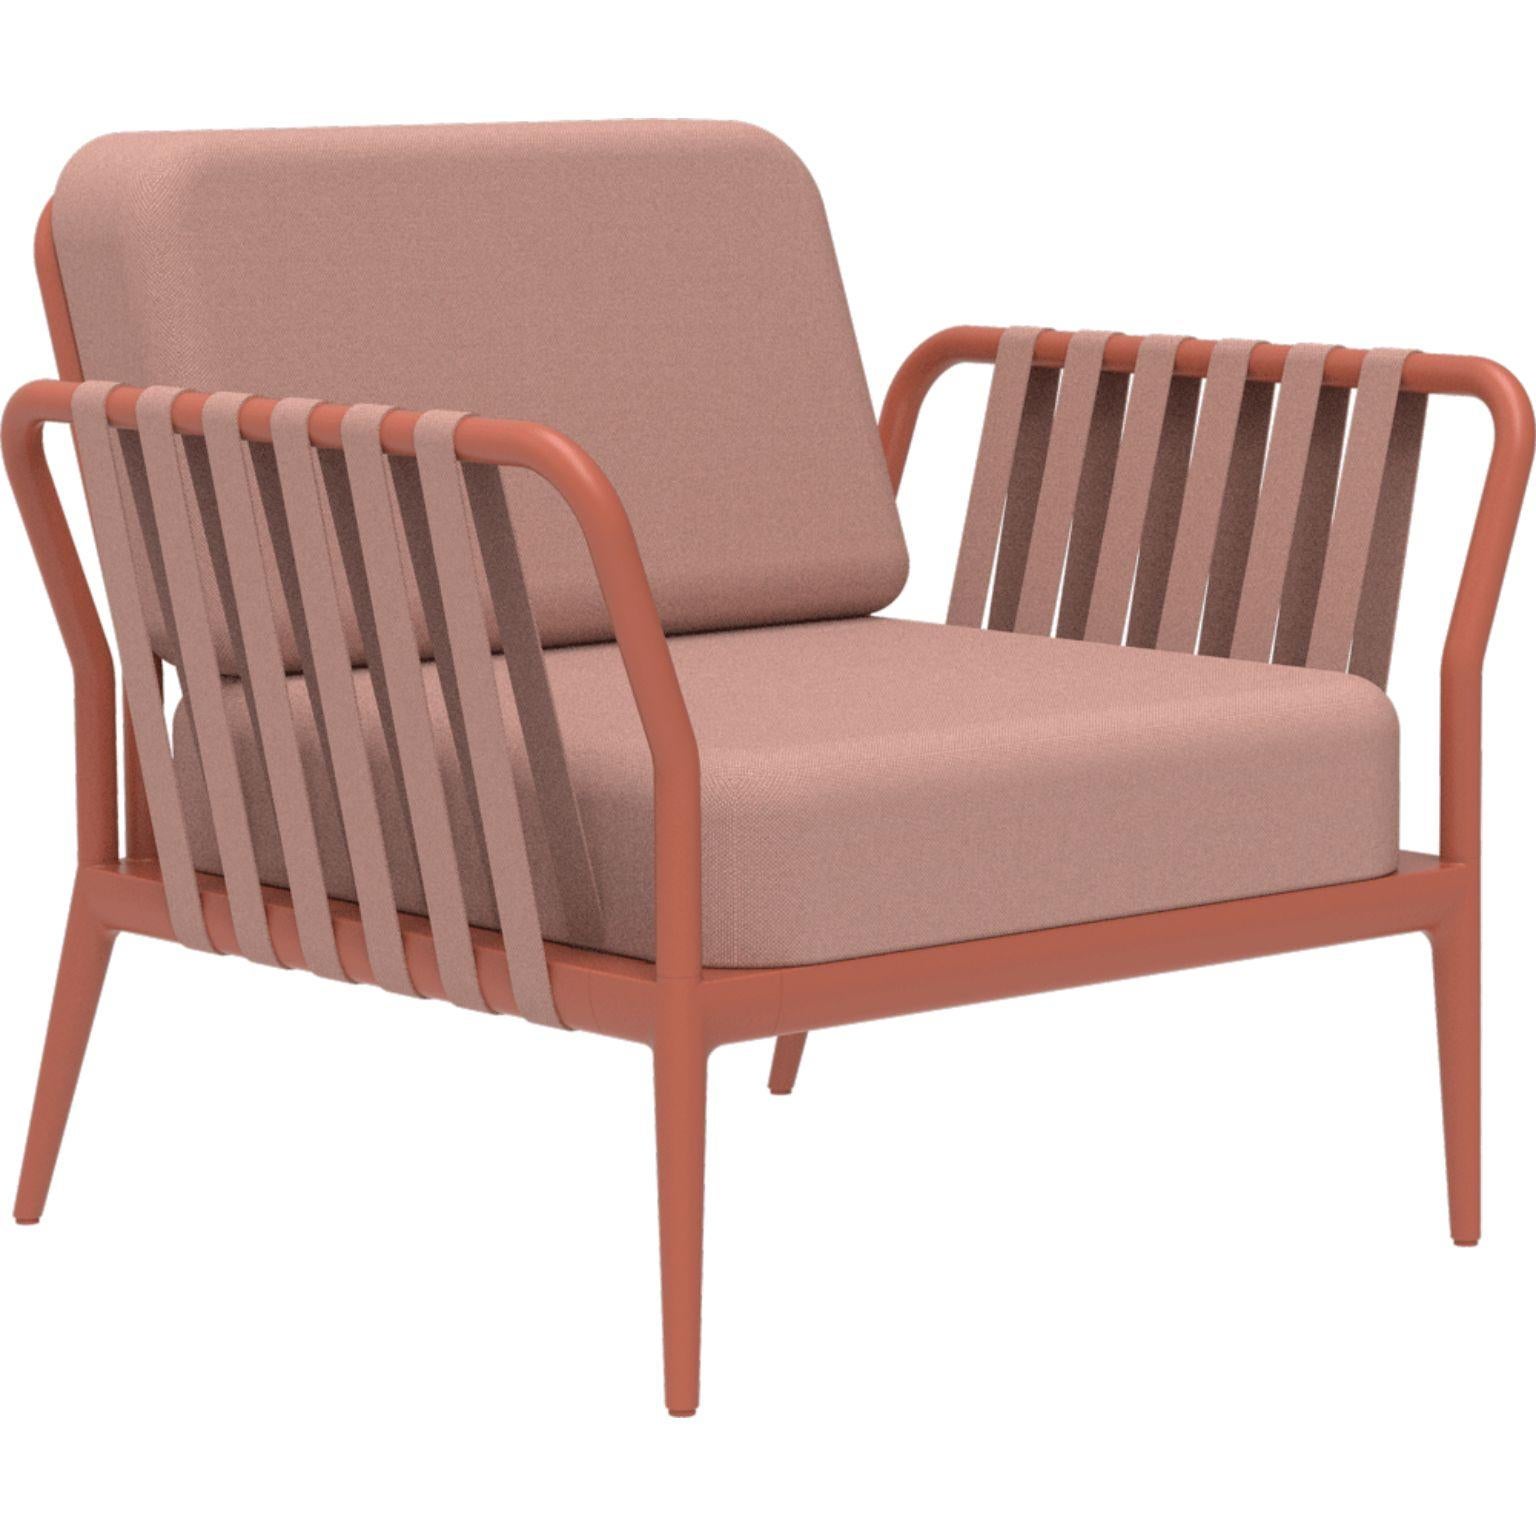 Ribbons salmon armchair by Mowee.
Dimensions: D83 x W91 x H81 cm (Seat Height 42 cm).
Material: Aluminium, upholstery.
Weight: 20 kg
Also Available in different colours and finishes. 

An unmistakable collection for its beauty and robustness.